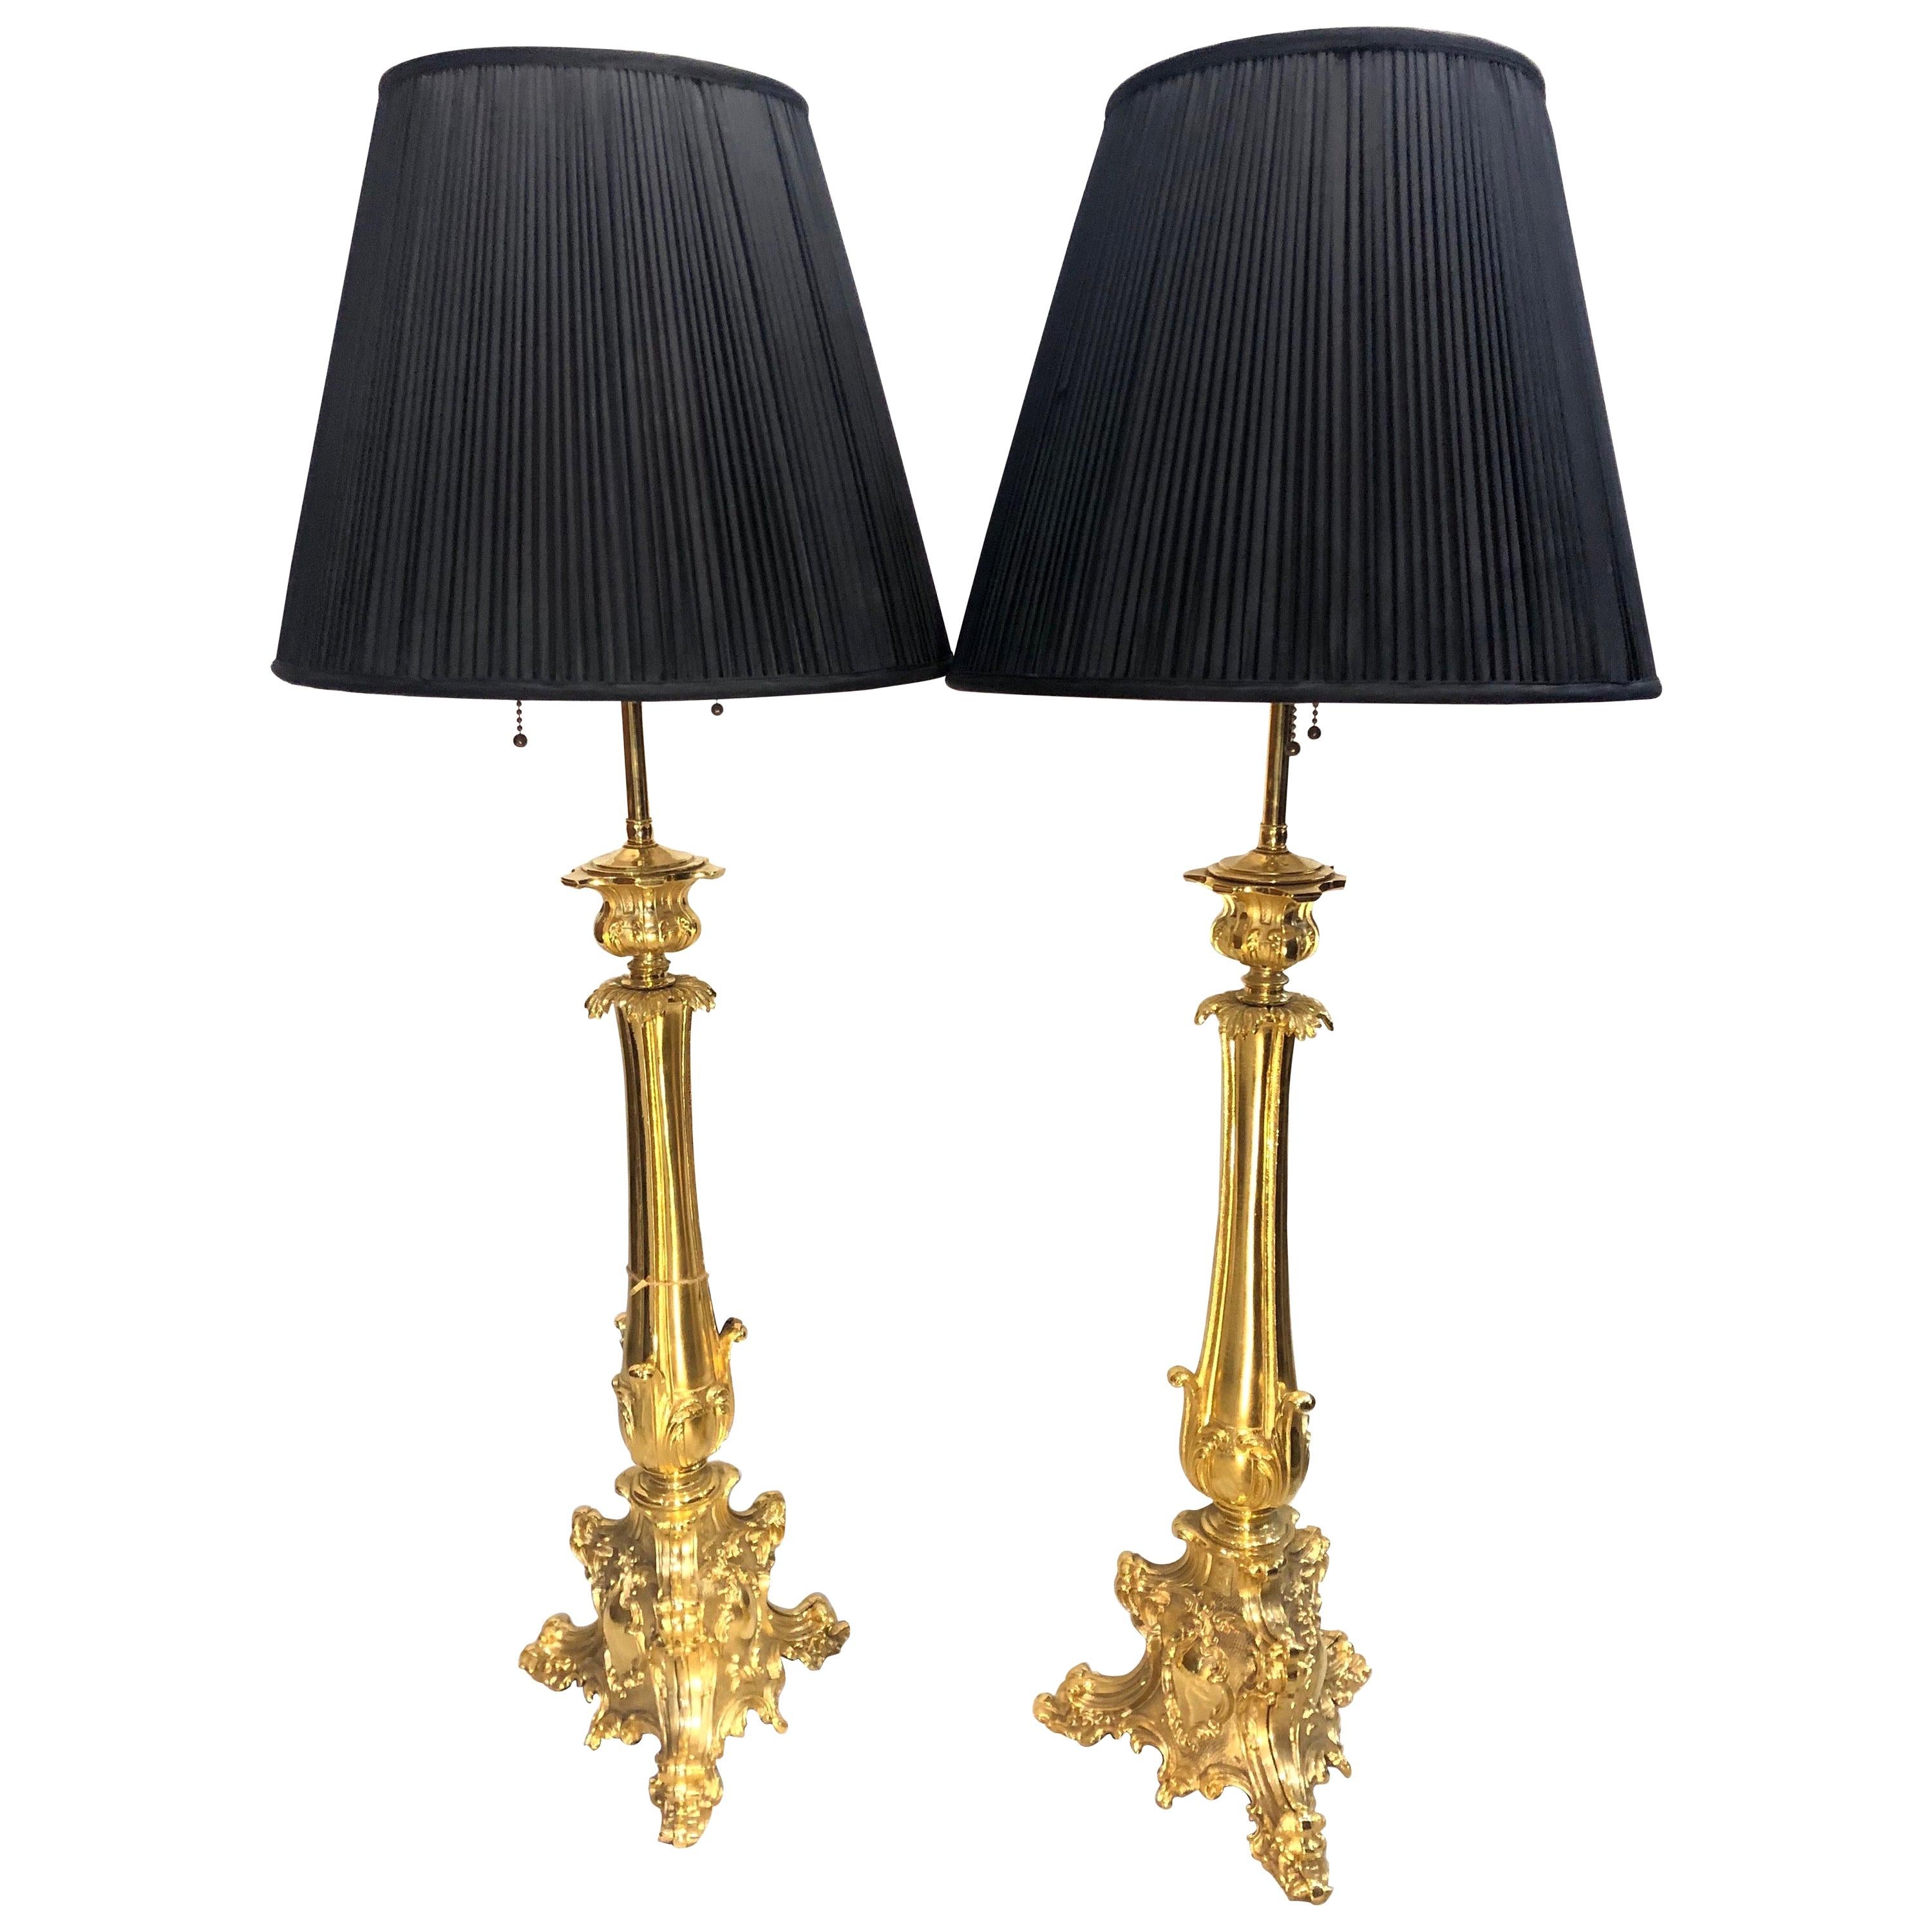 Pair of Late 19th Century French Gilt Bronze Lamps